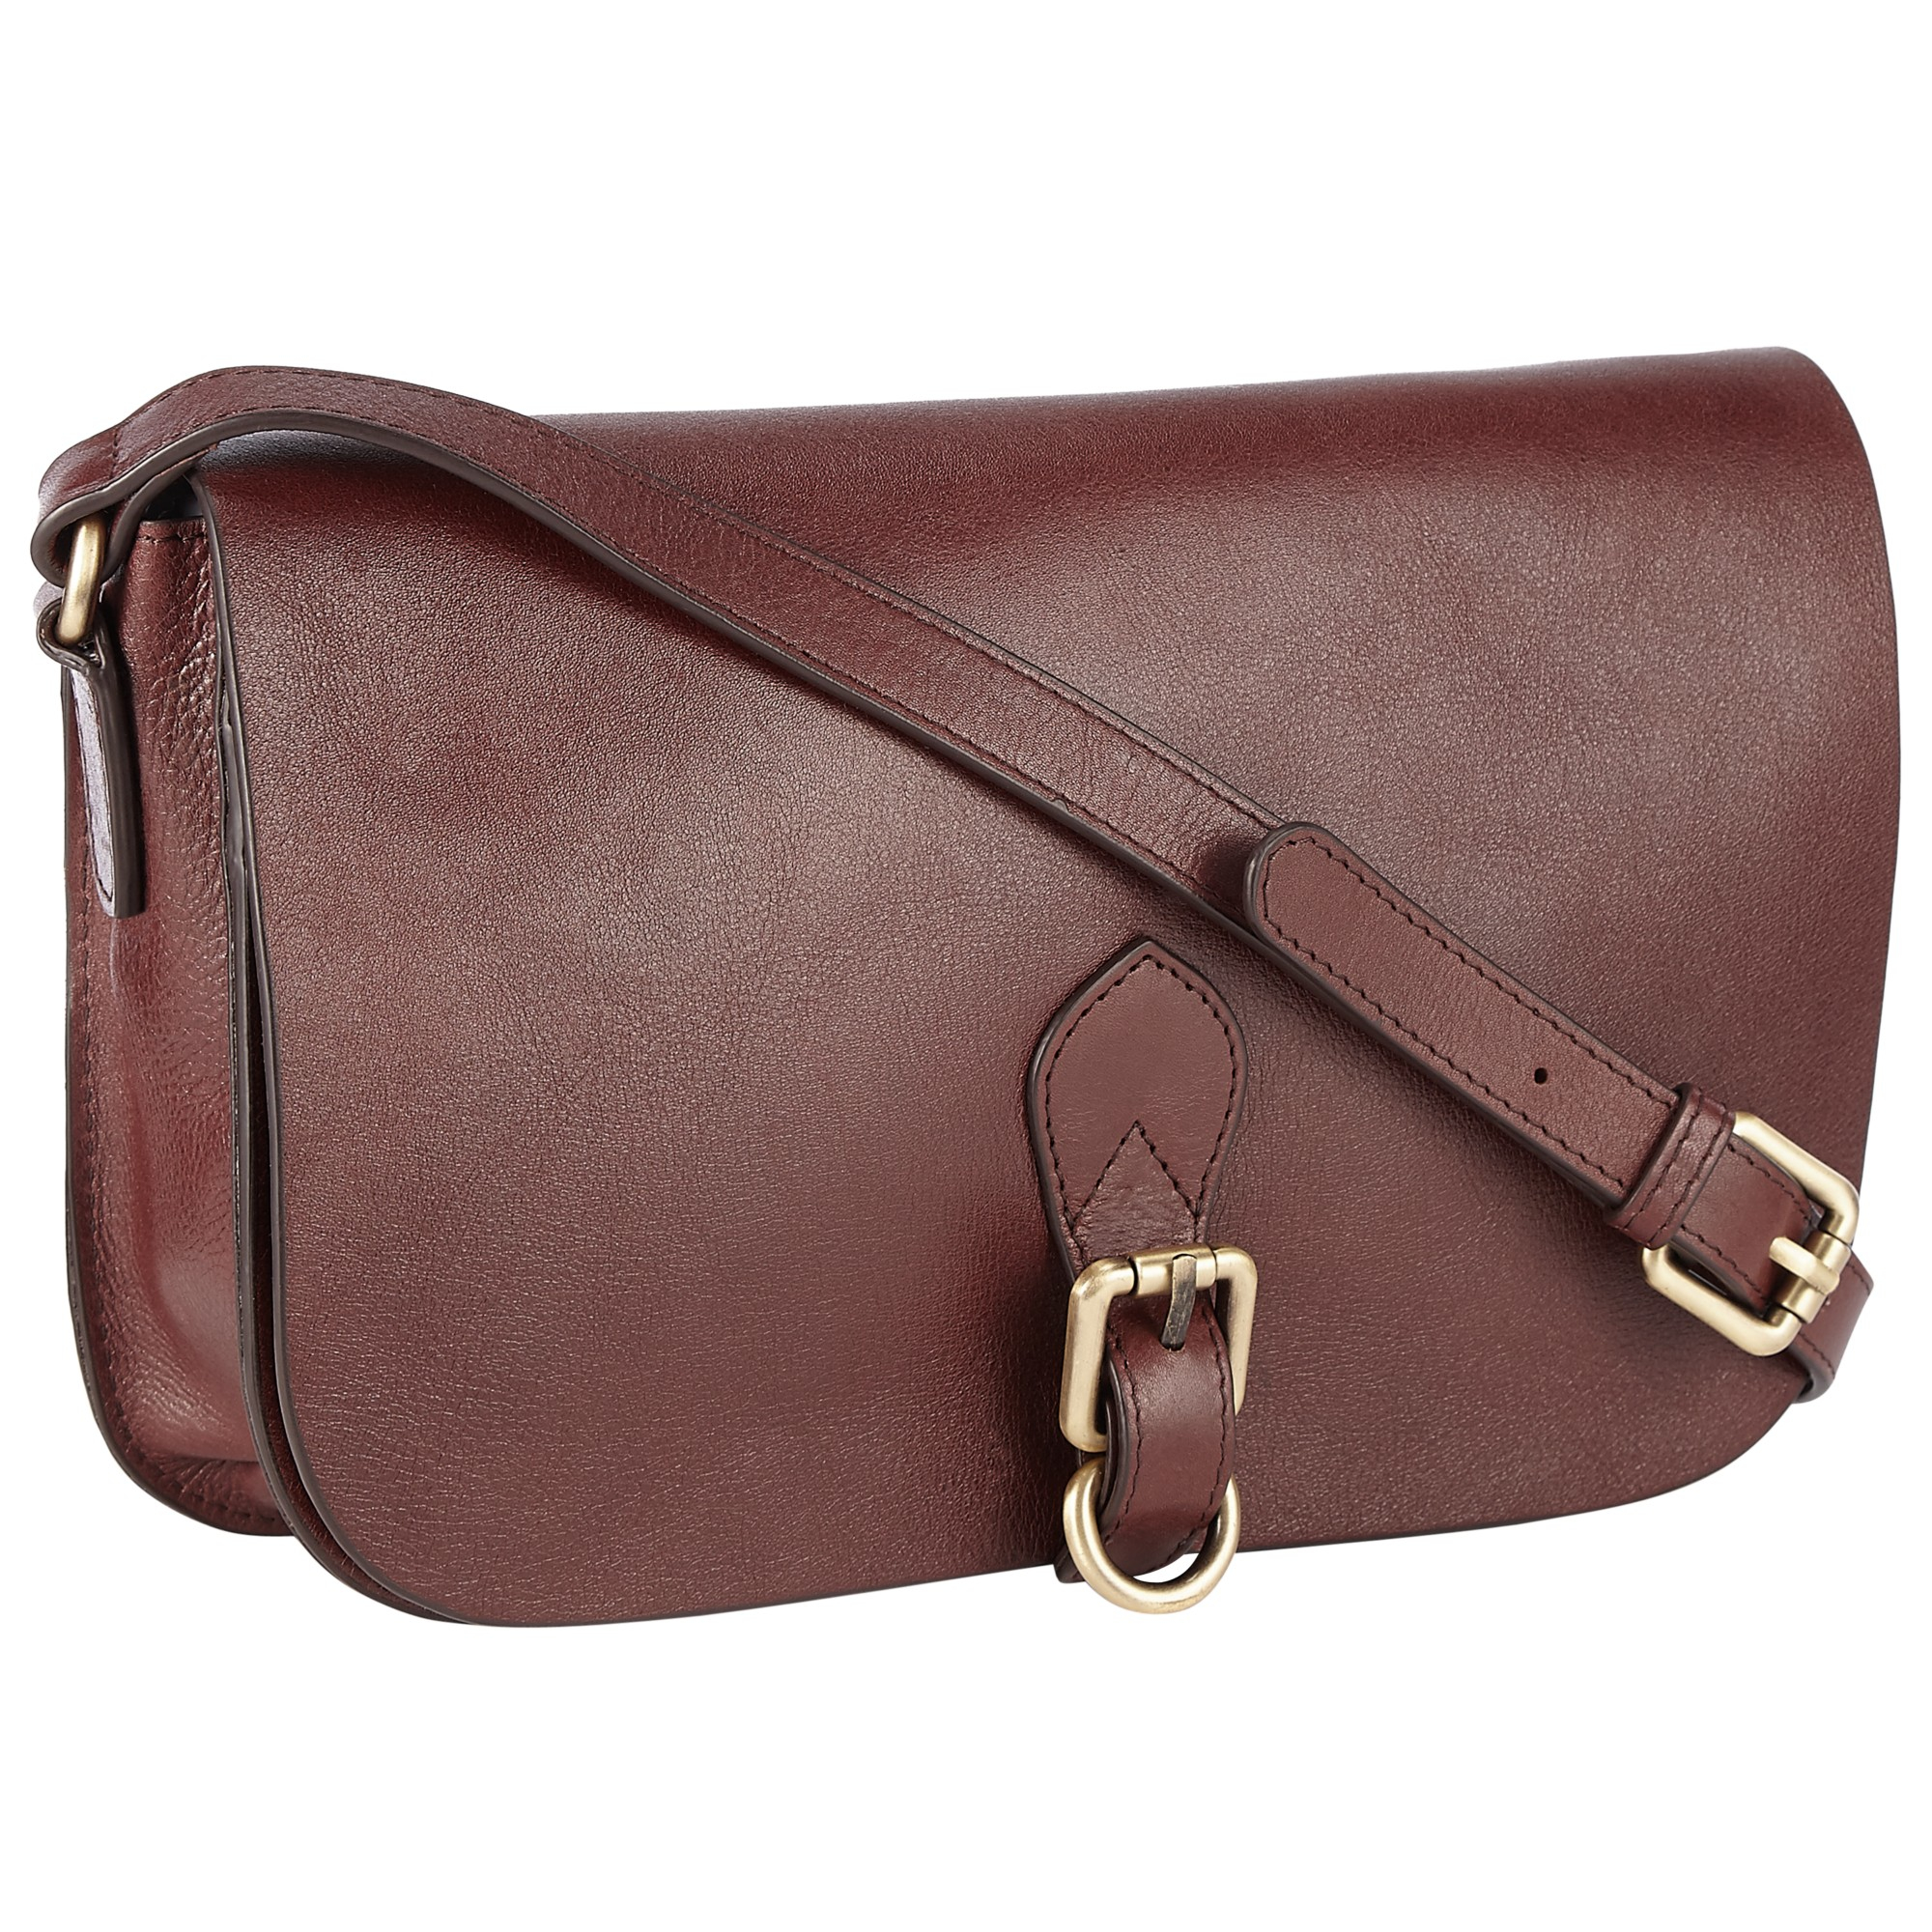 Lyst - John Lewis Octavia Small Leather Across Body Bag in Brown